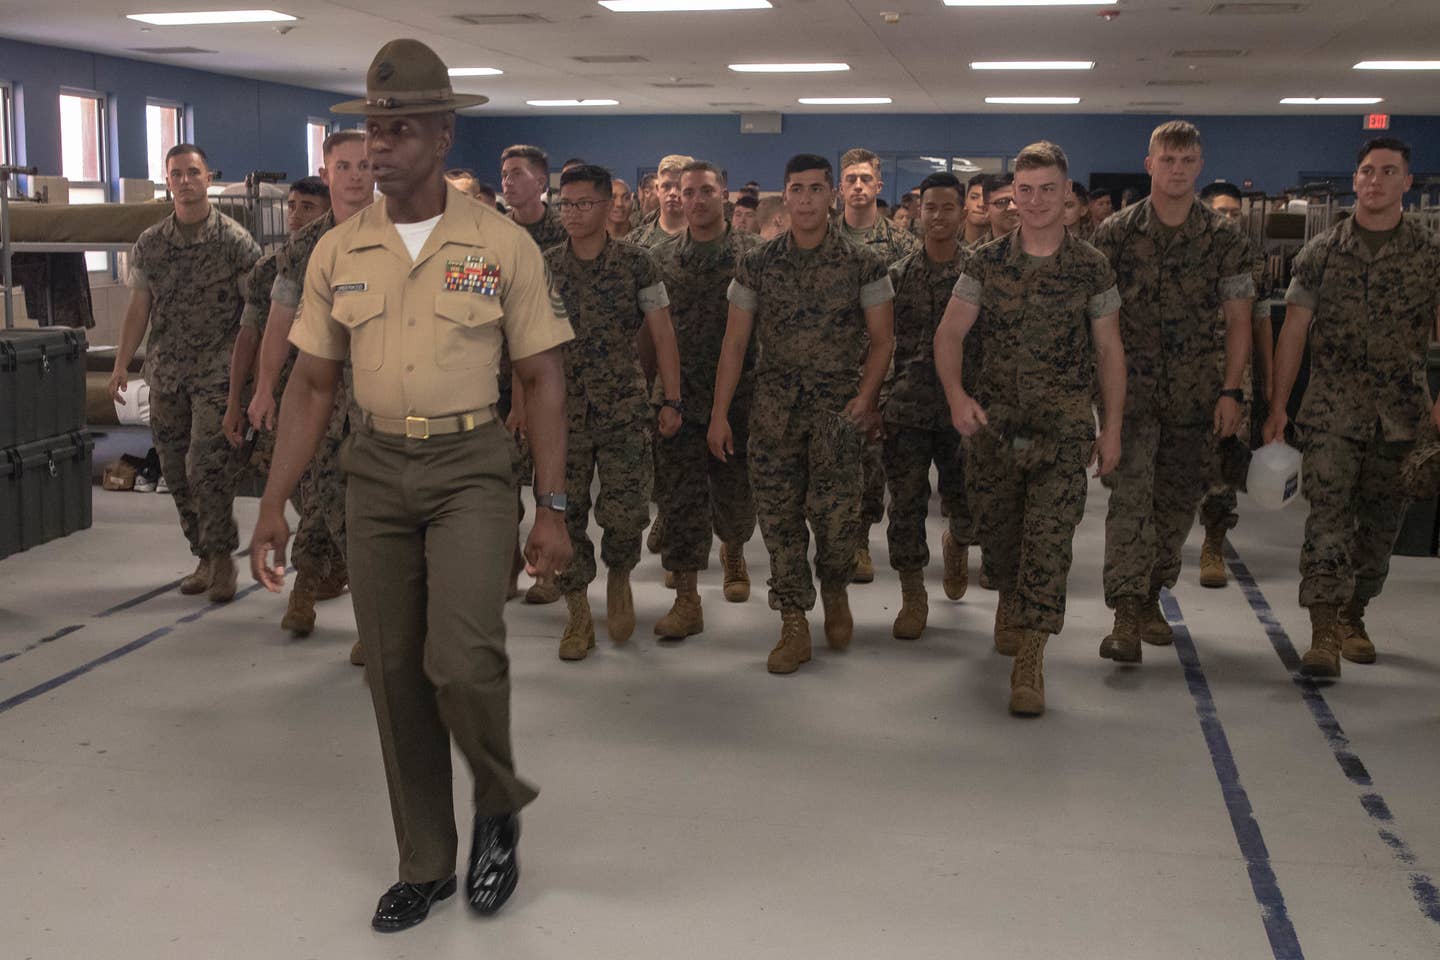 Marines return to their old stomping grounds